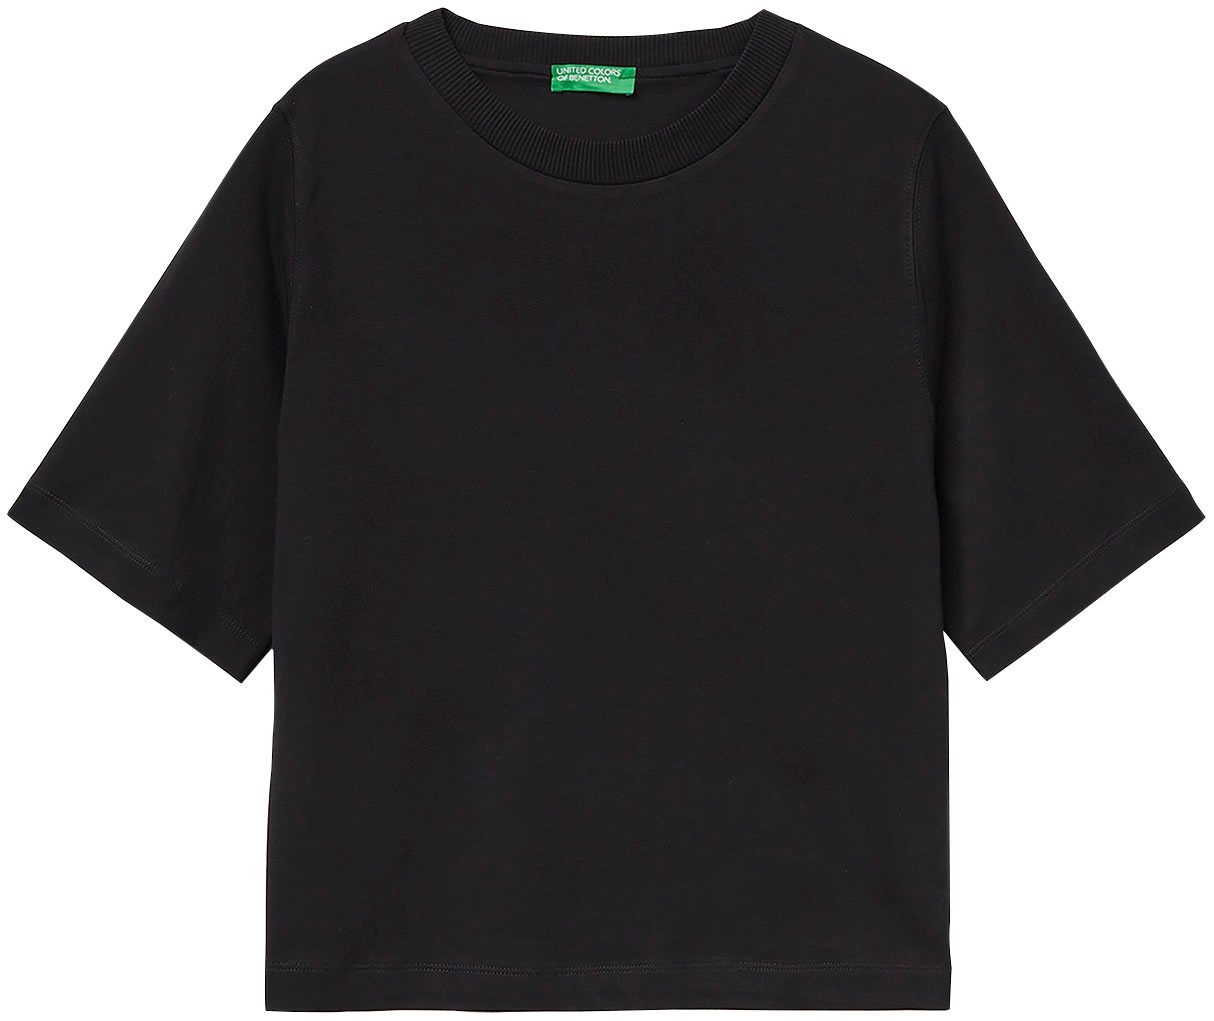 of United Look im Benetton Colors ♕ T-Shirt, Basic bei